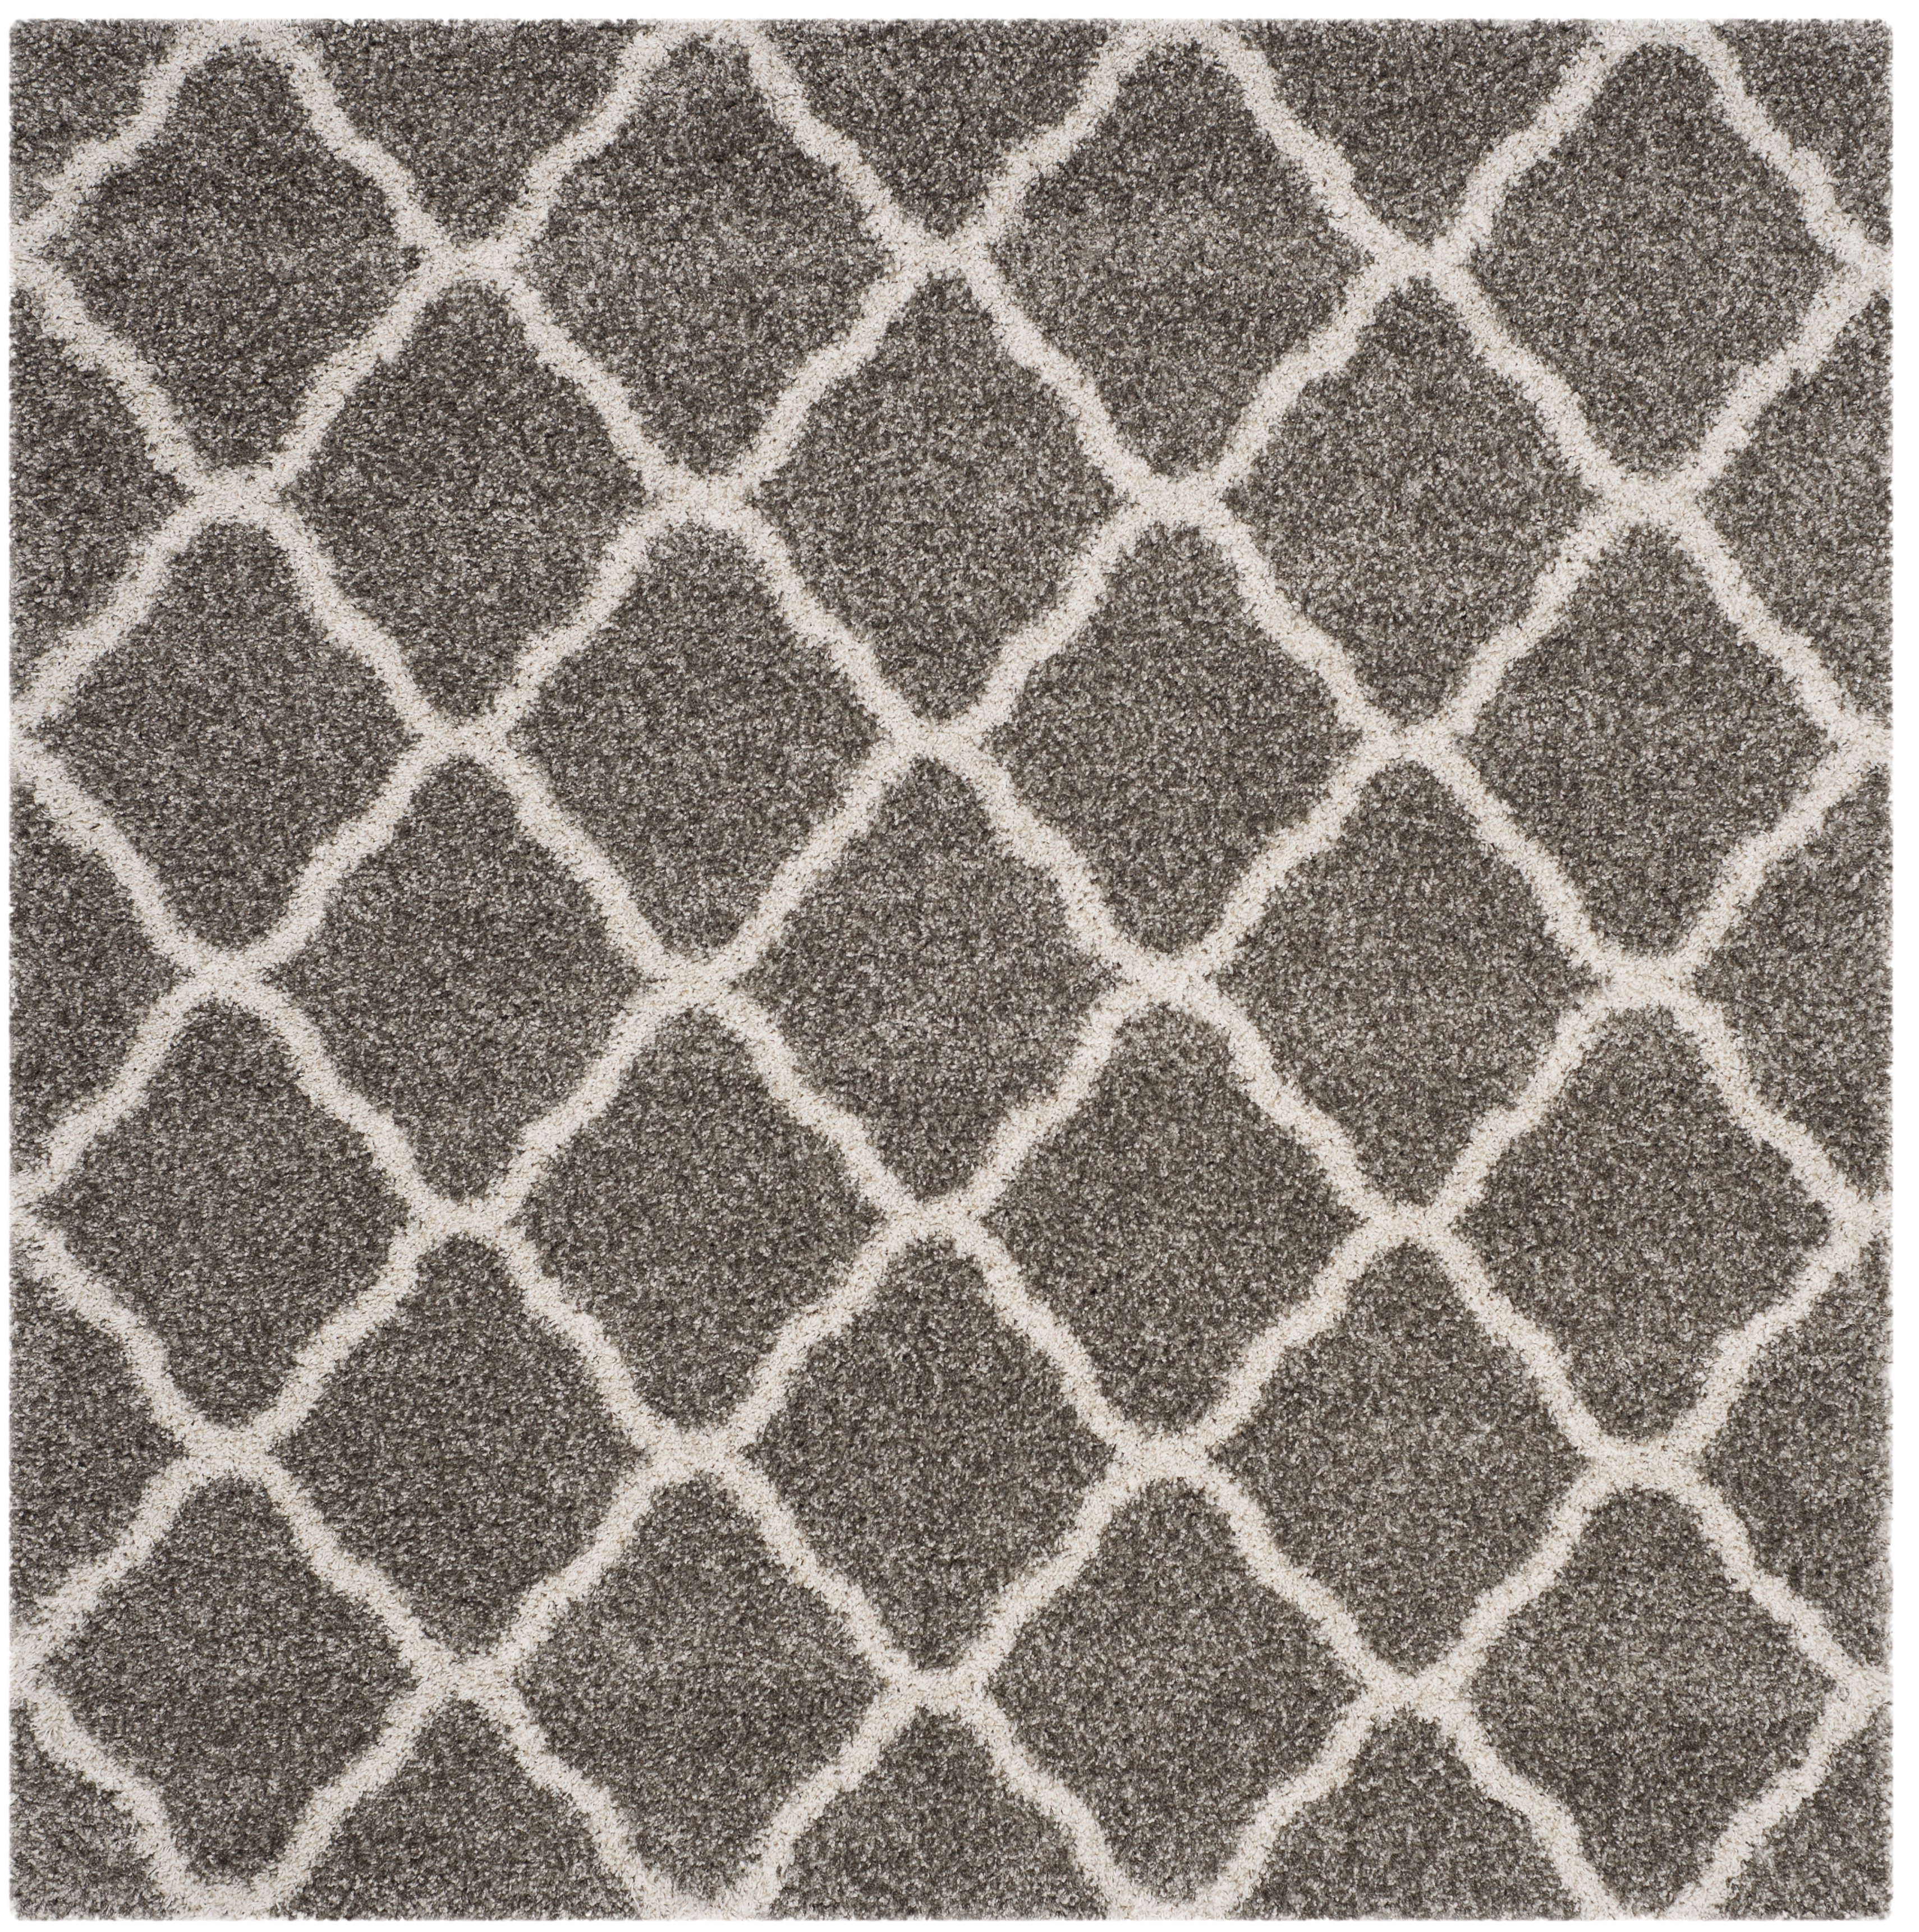 Arlo Home Woven Area Rug, SGH283B, Grey/Ivory,  7' X 7' Square - Image 0